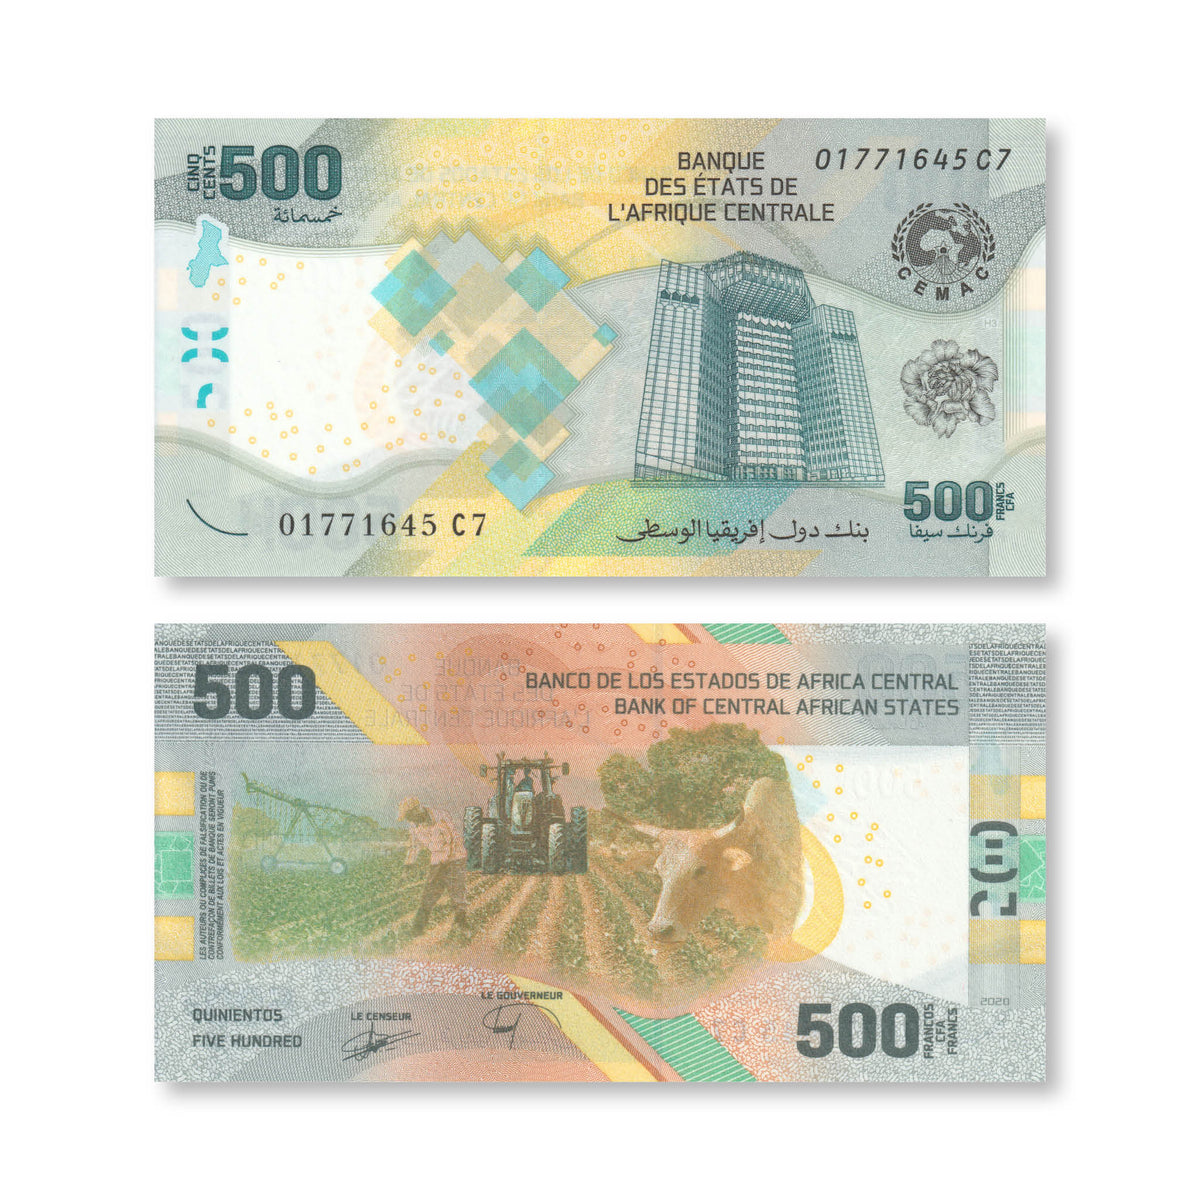 Central African States 500 Francs, 2020 (2022), B111a, UNC - Robert's World Money - World Banknotes